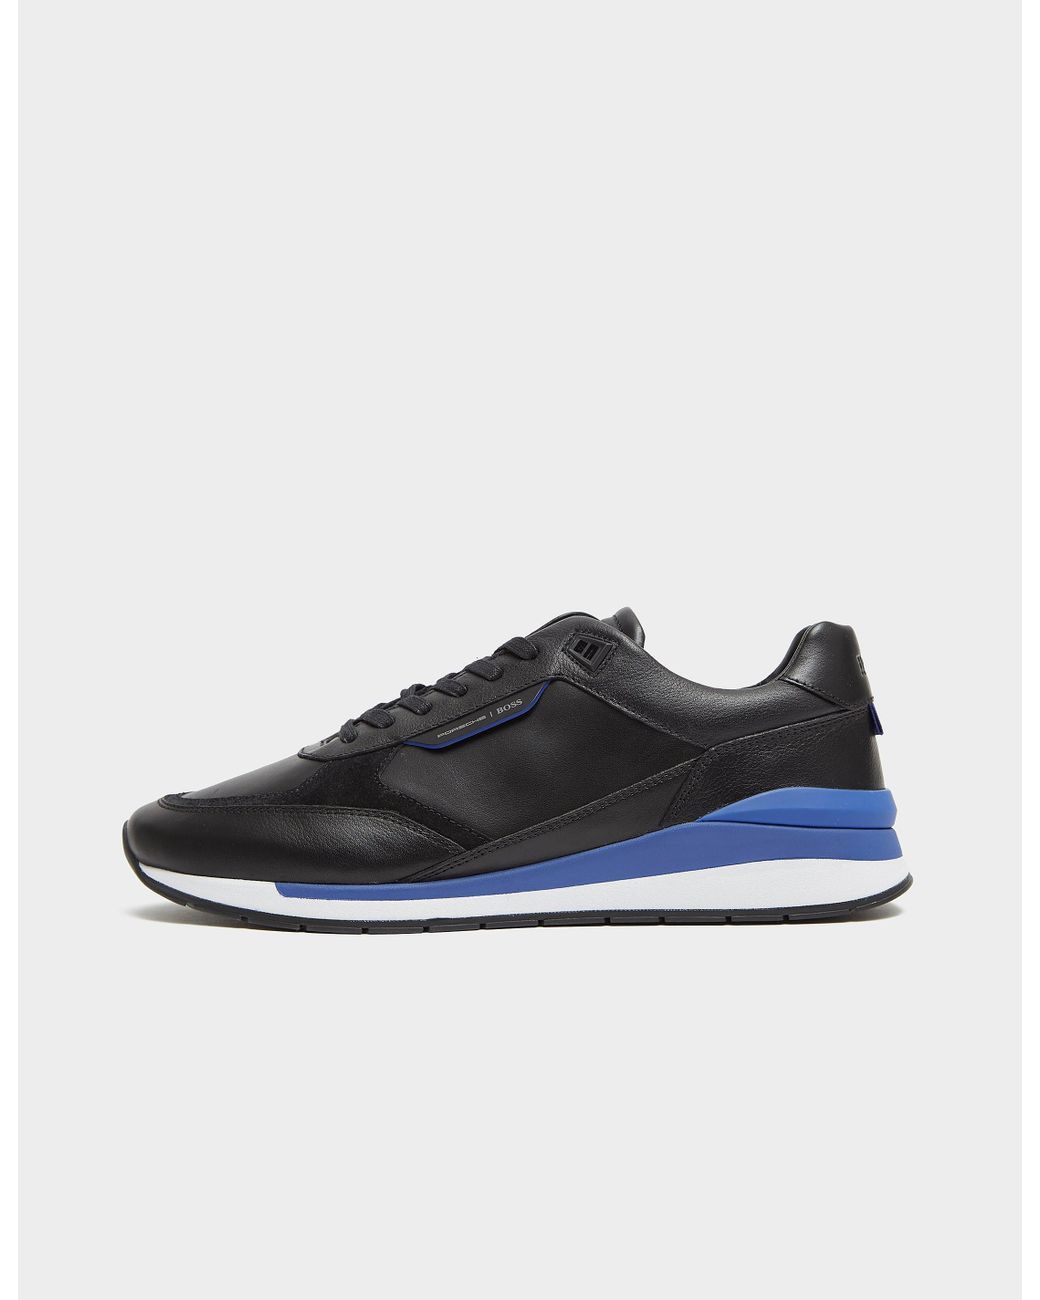 BOSS by HUGO BOSS Leather X Porsche Element Runners Trainers in Black ...